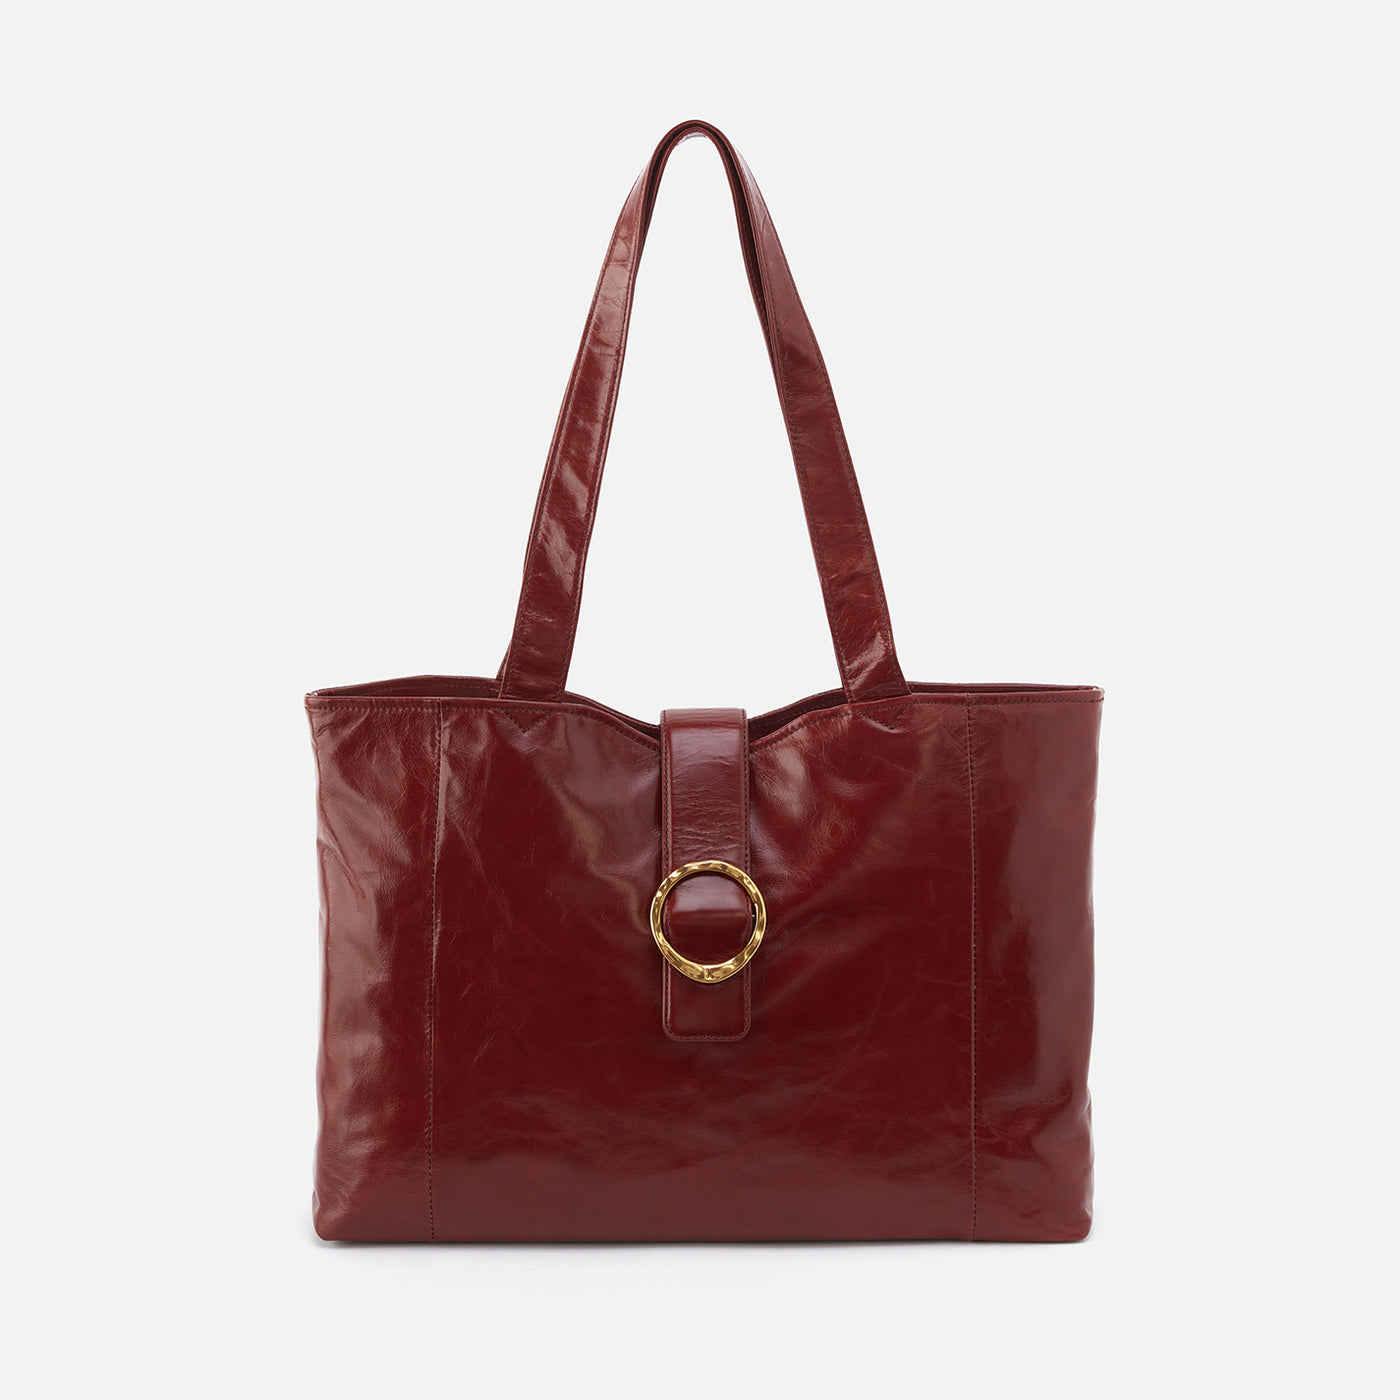 Sawyer Tote in Polished Leather - Henna